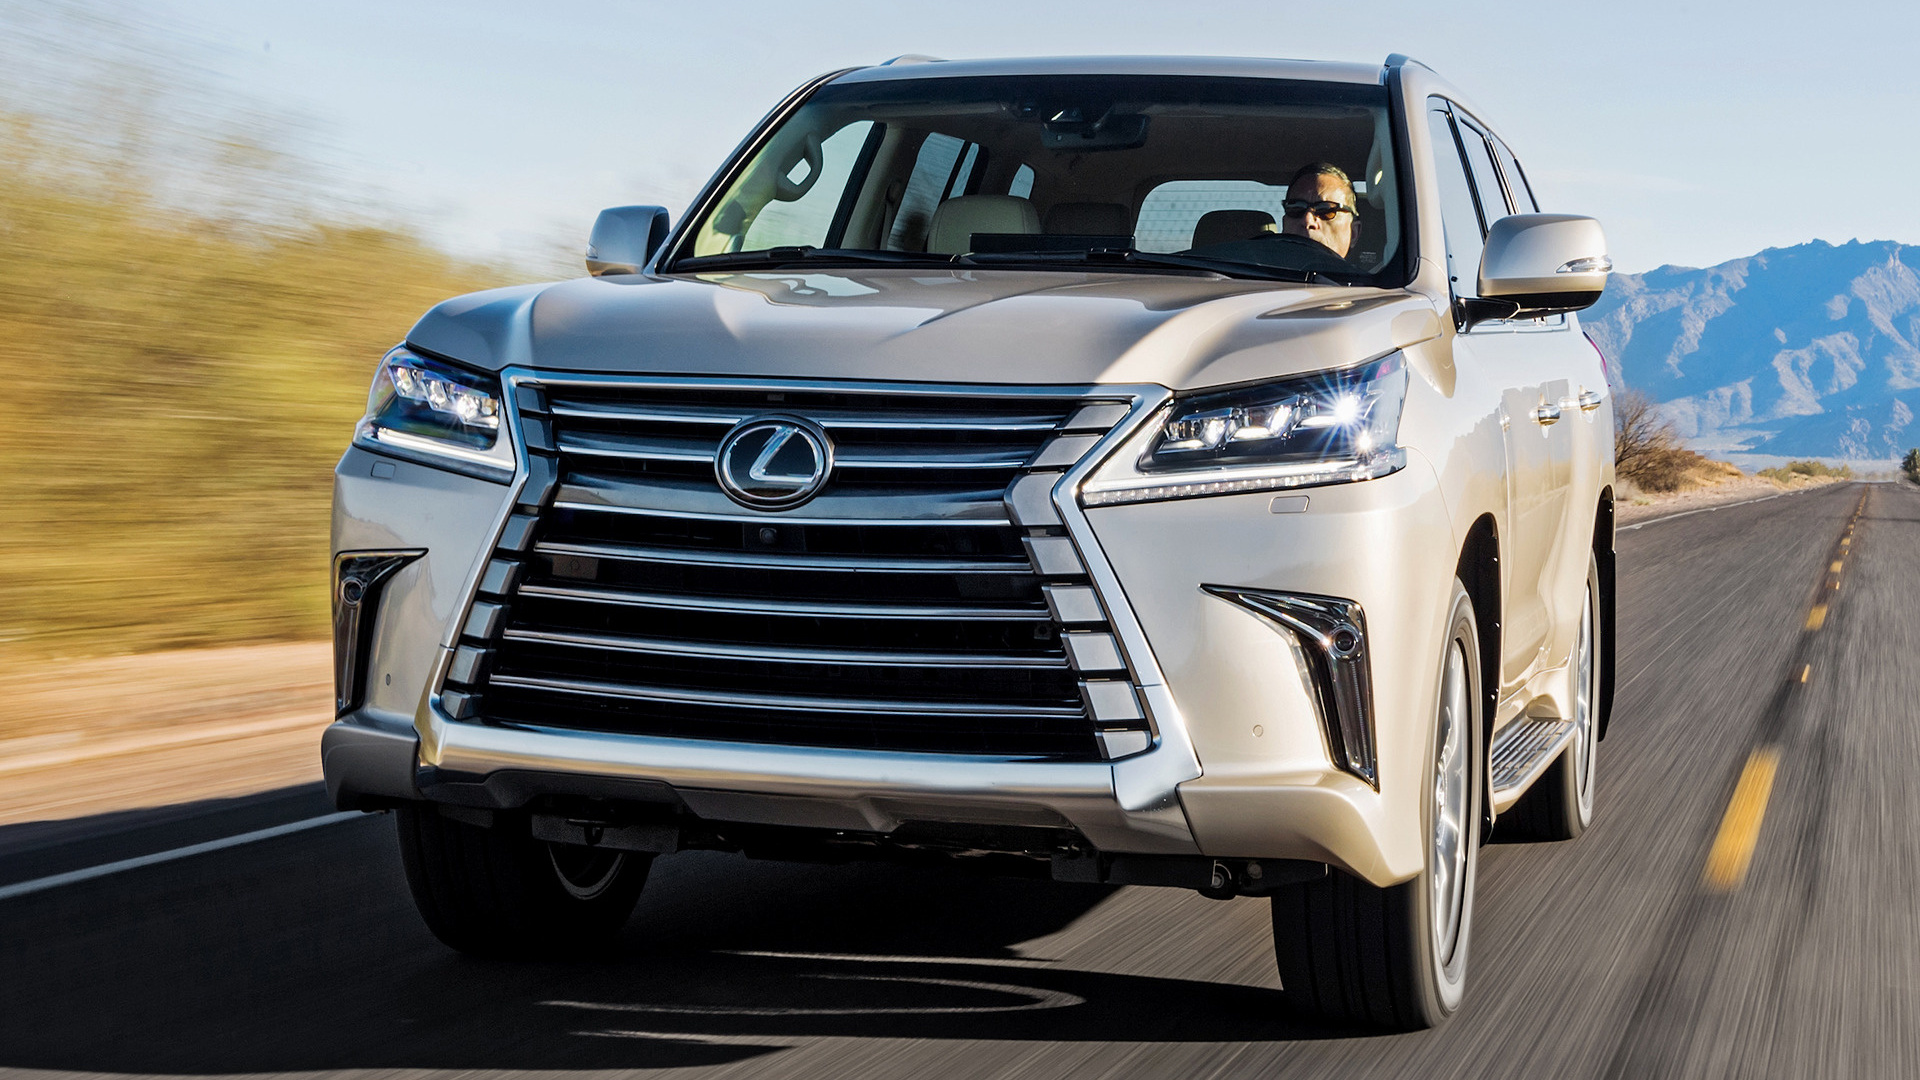 2018 Lexus LX Two-Row - Wallpapers and HD Images | Car Pixel